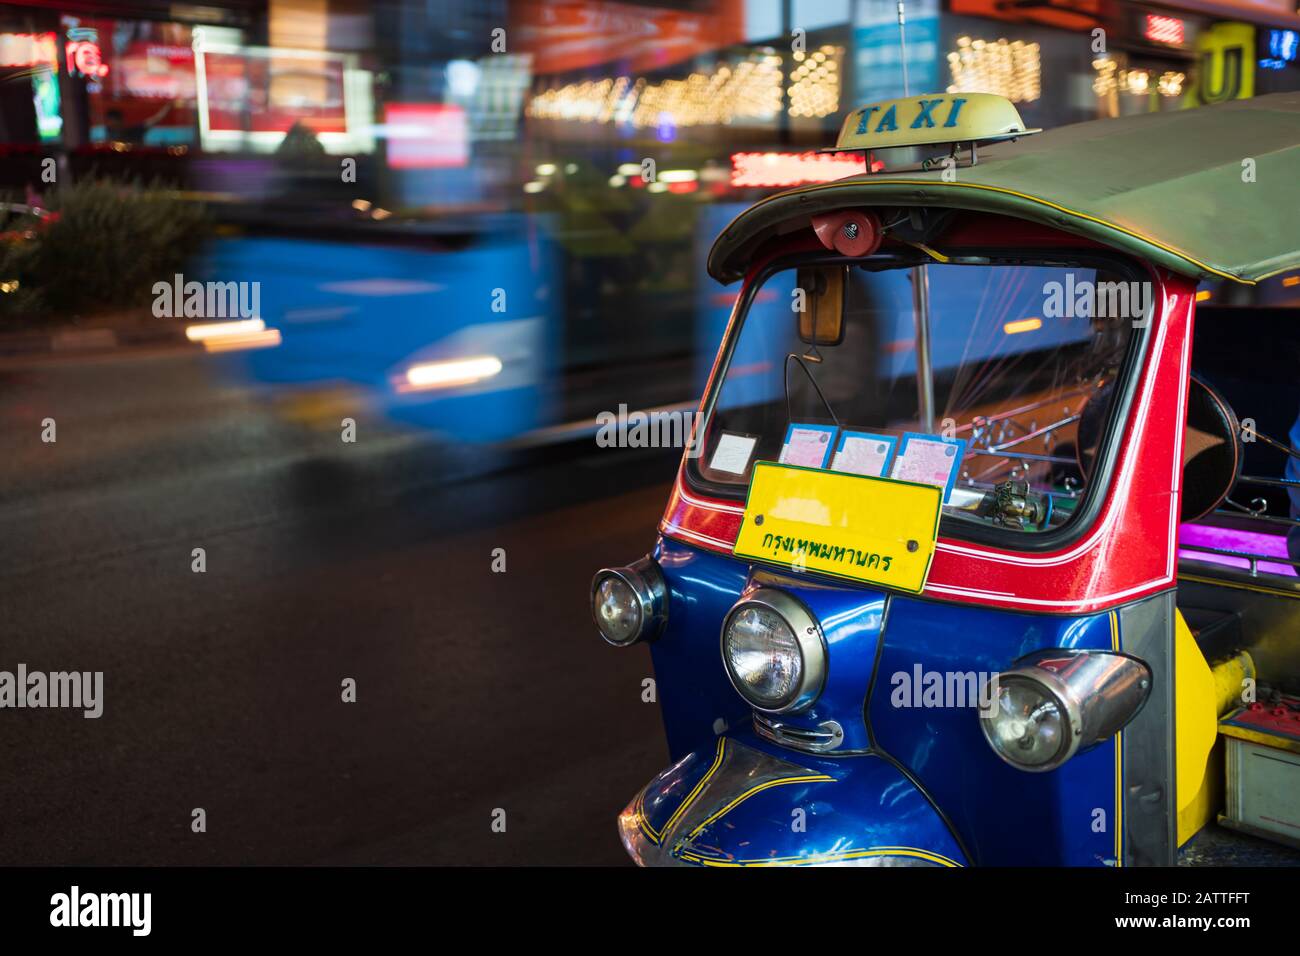 Tuk Tuk, a 3-wheeled taxi in Thailand, on the road in Bangkok at night. A word on license plate is a Thai word 'Krungthepmahanakhon' means Bangkok. Stock Photo